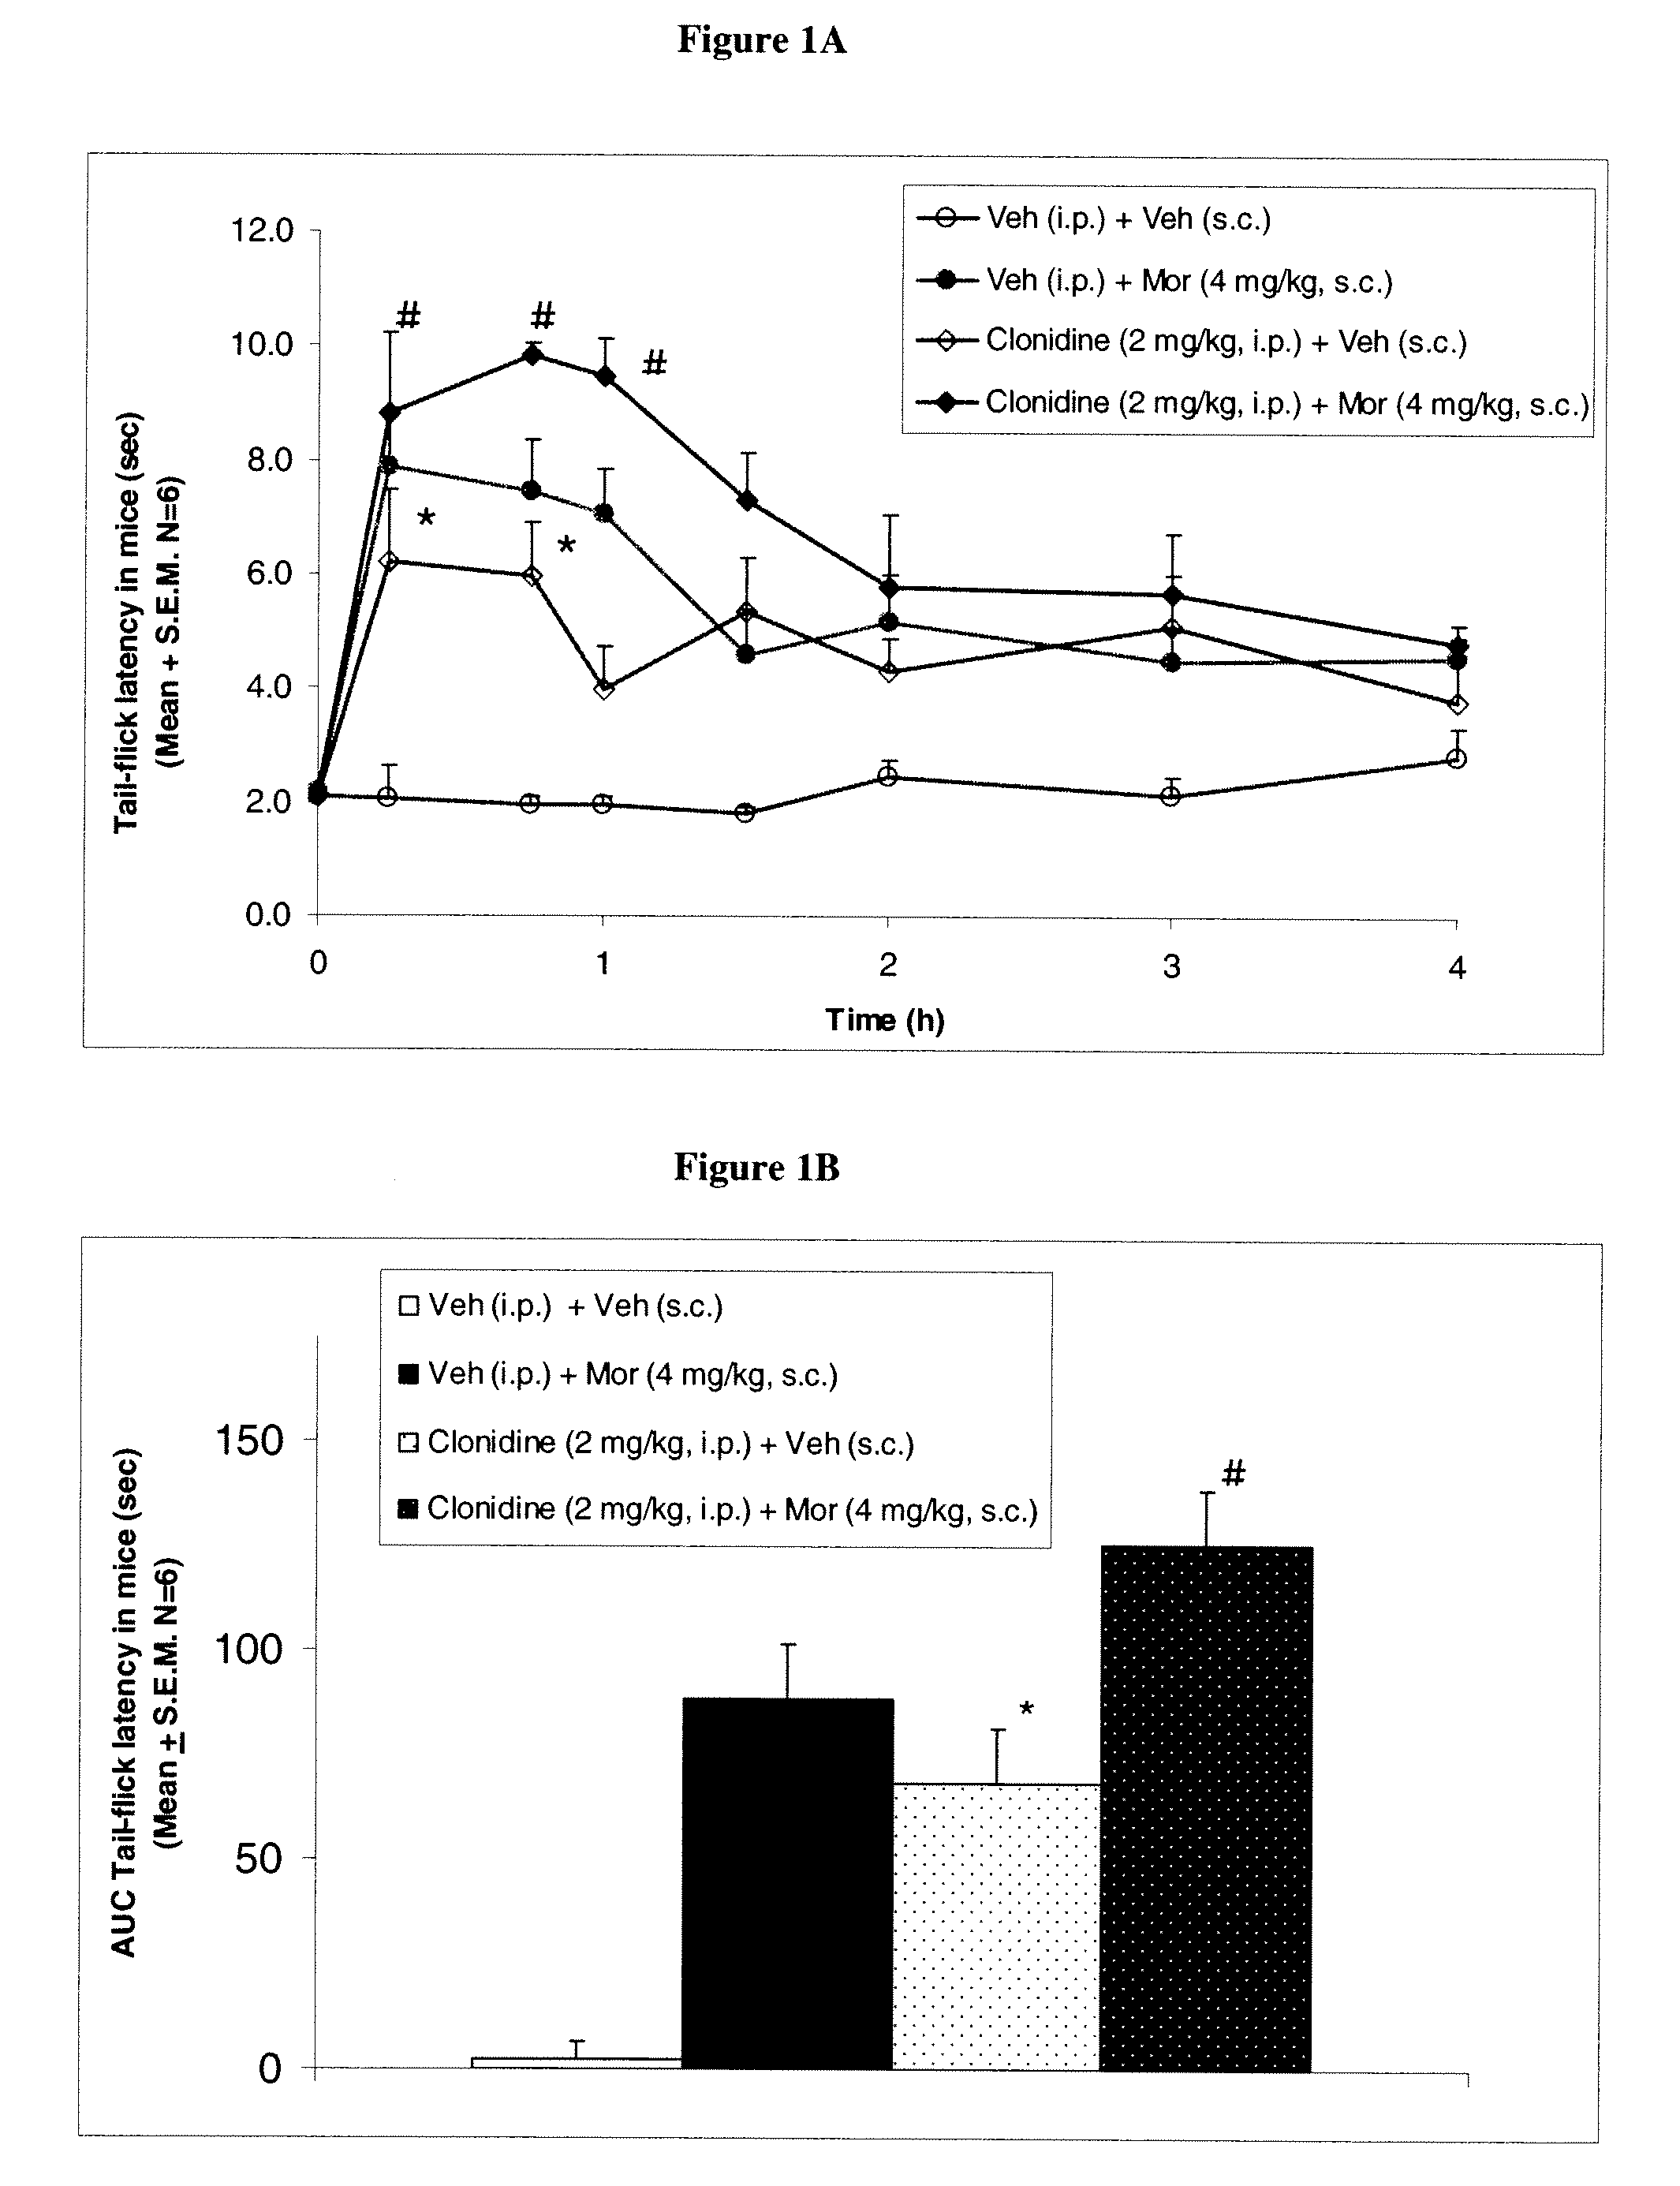 Methods to treat pain using an alpha-2 adrenergic agonist and an endothelin antagonist